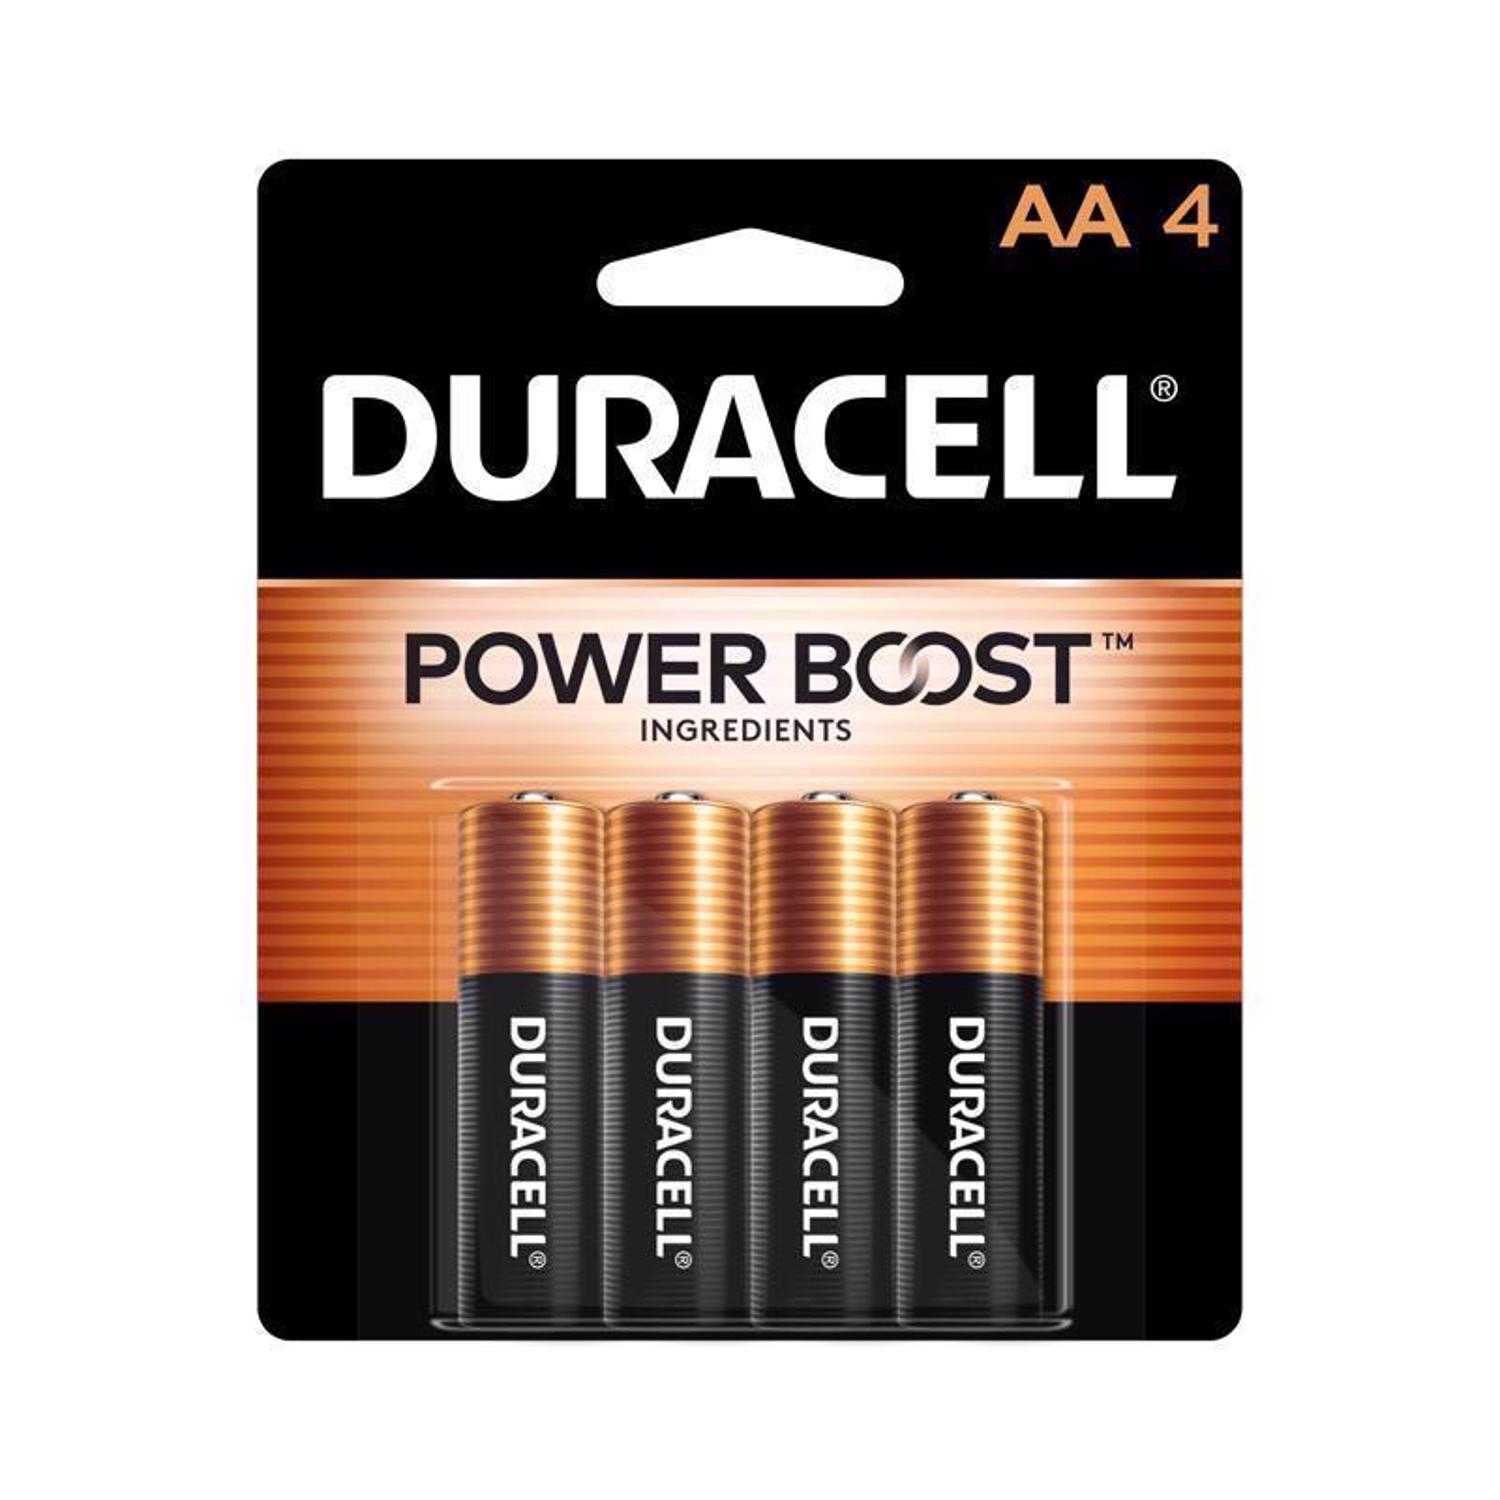 Photos - Household Switch Duracell Coppertop AA Alkaline Batteries 4 pk Carded MN1500B4Z 